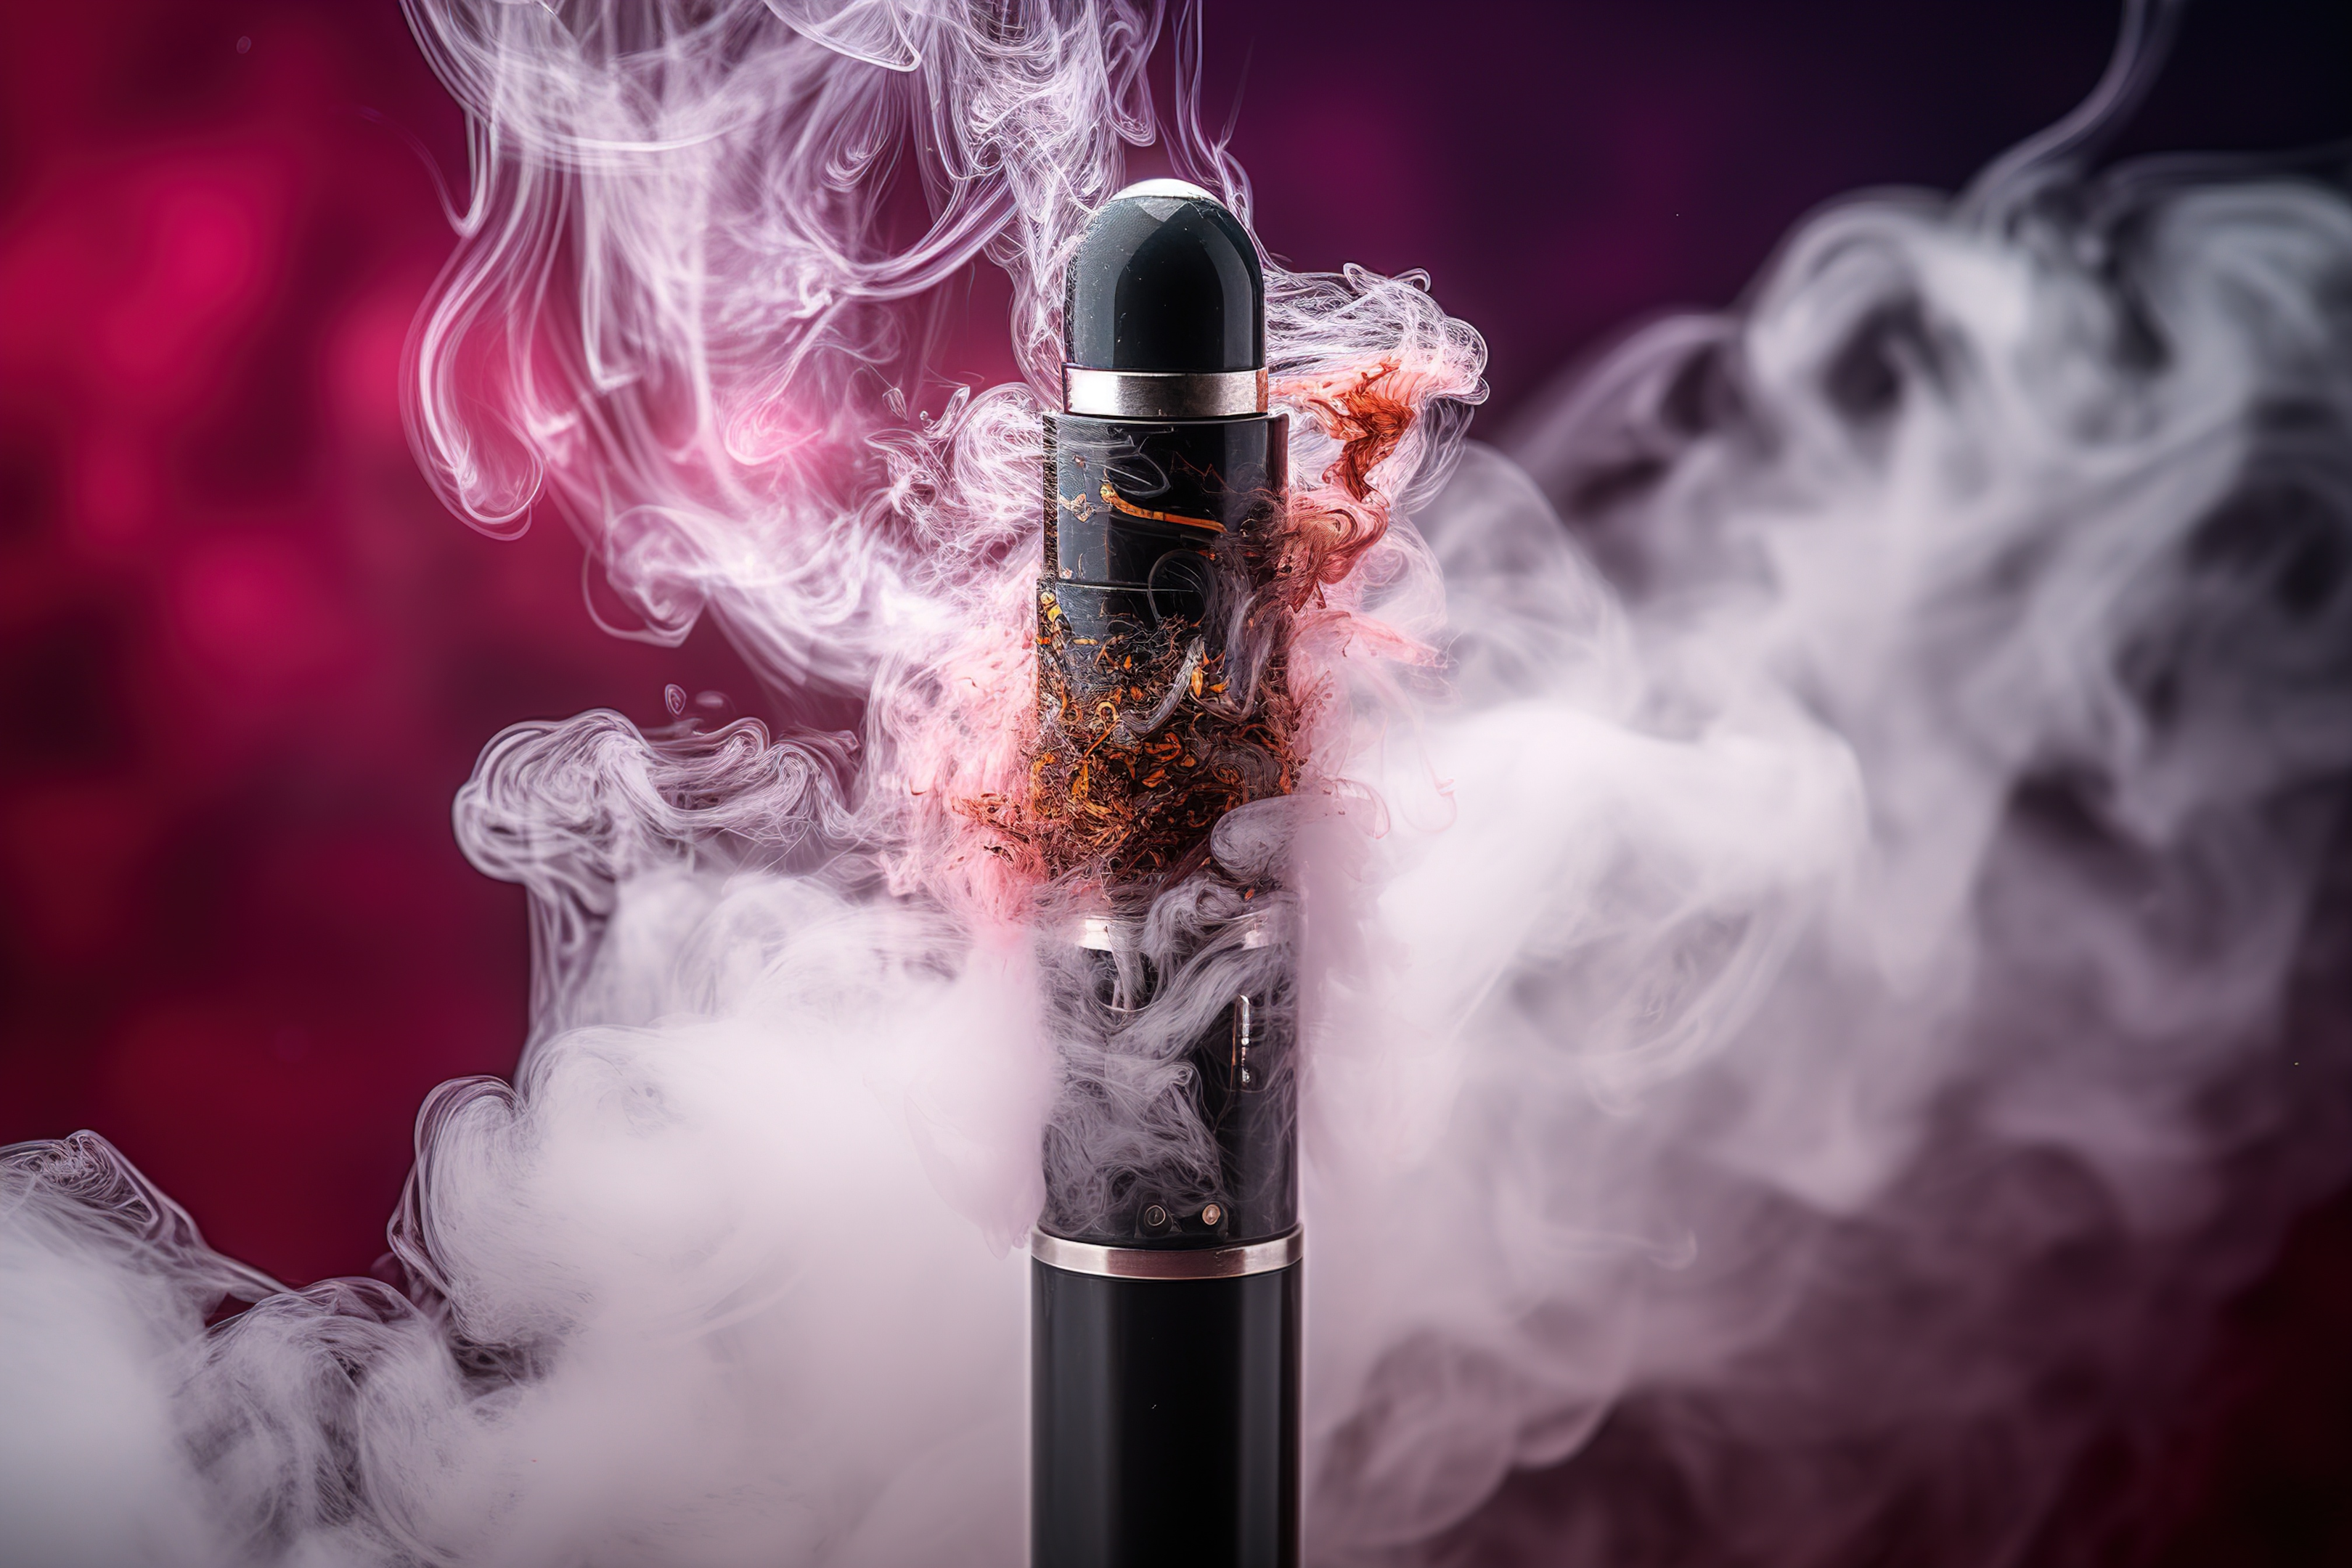 Vapes in general, whether it's a Delta 8 vape or other, may present with similar issues like excess oil or depending on the frequency and duration of puffs, coil issues may occur.